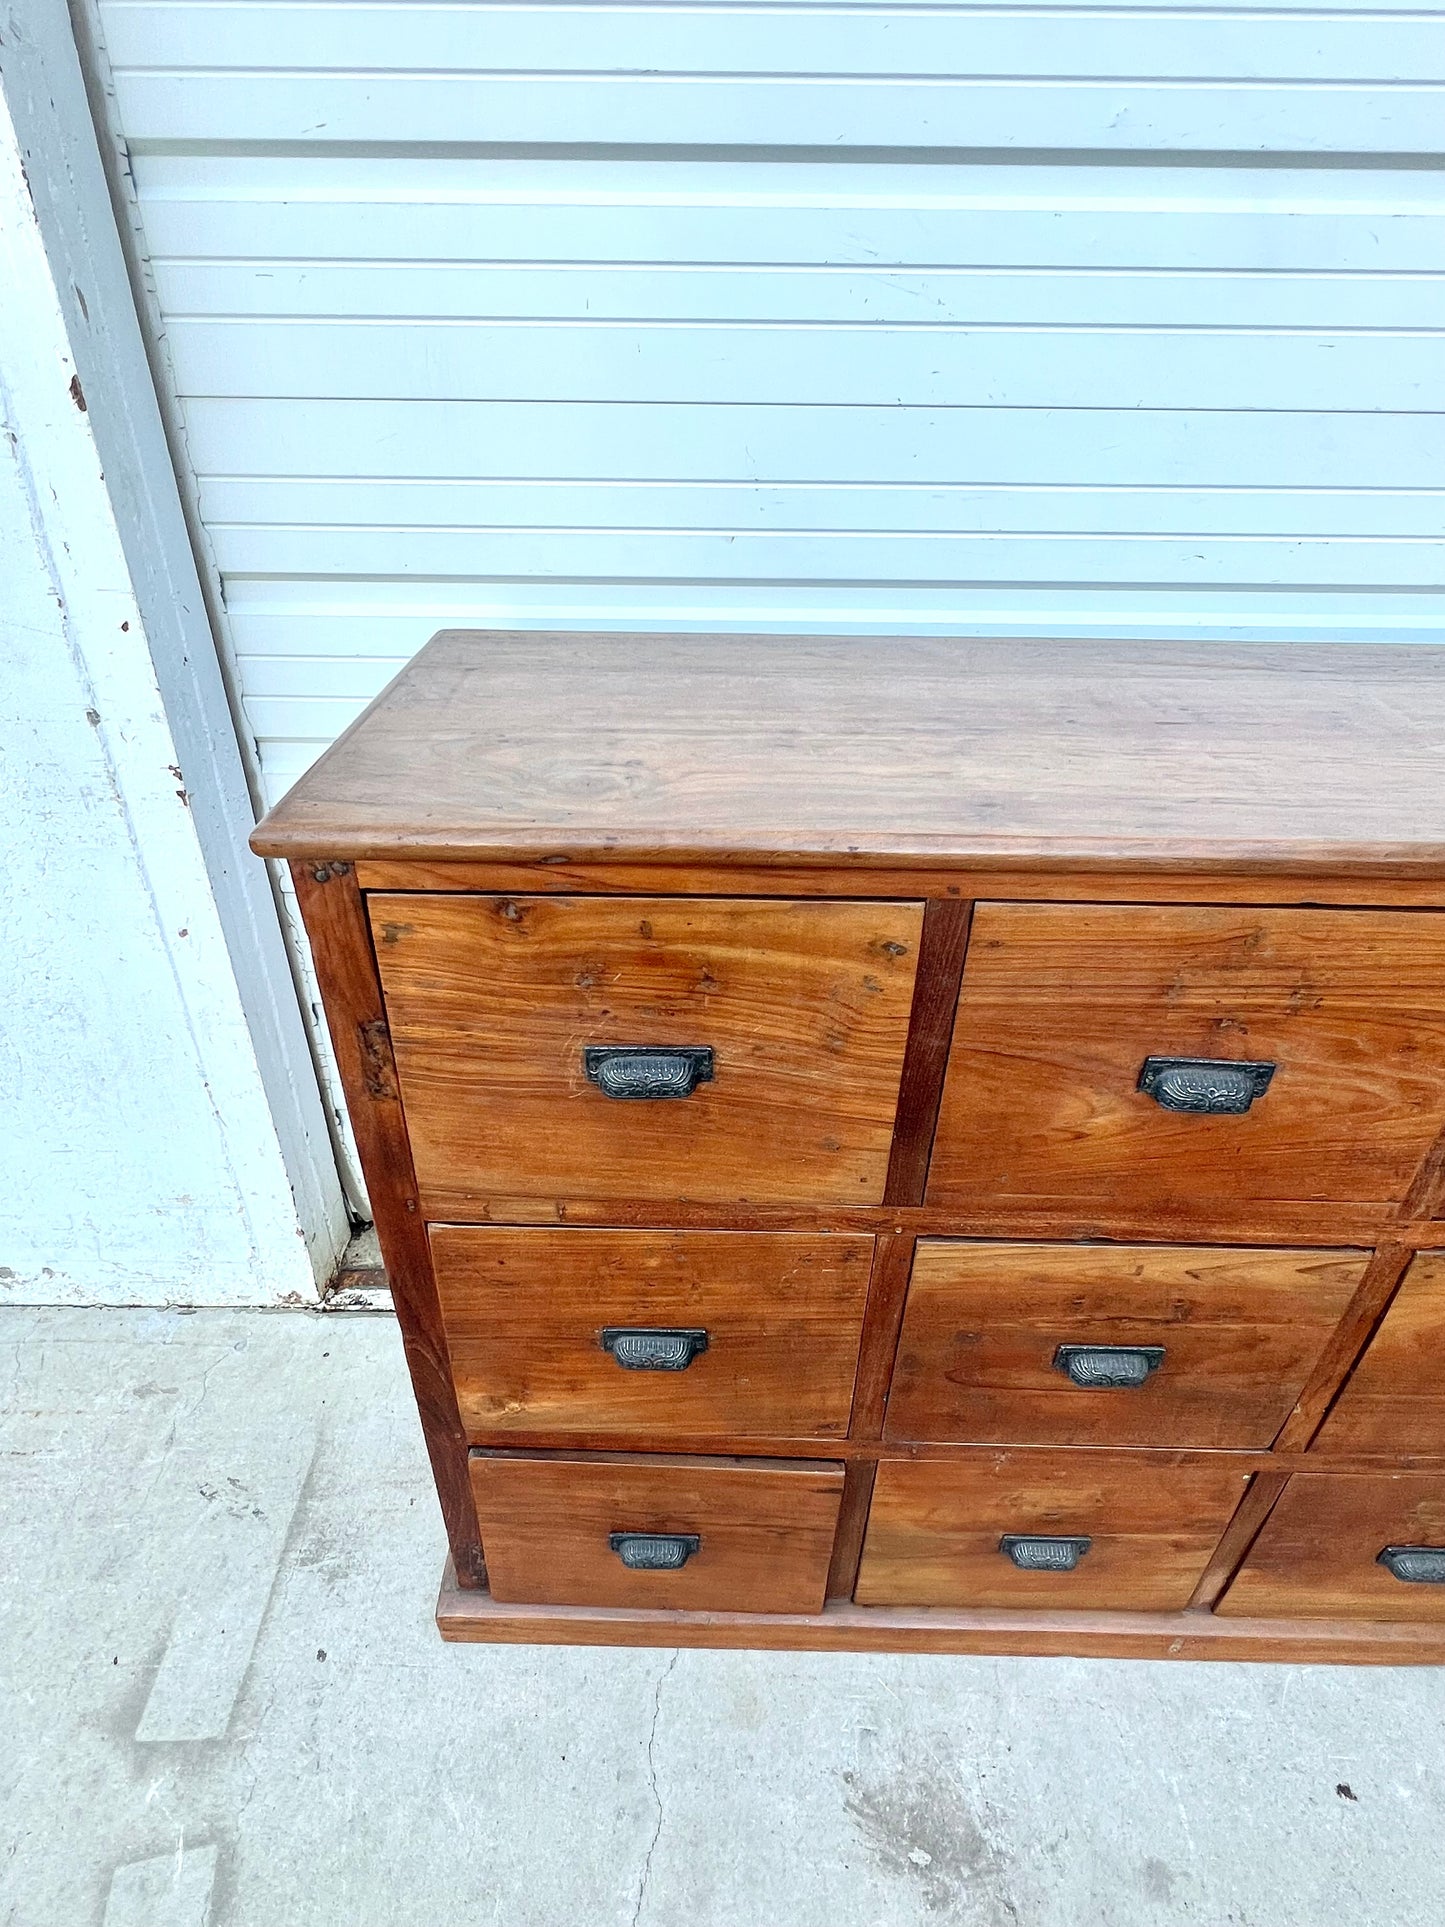 Wood Cabinet with 20 Drawers